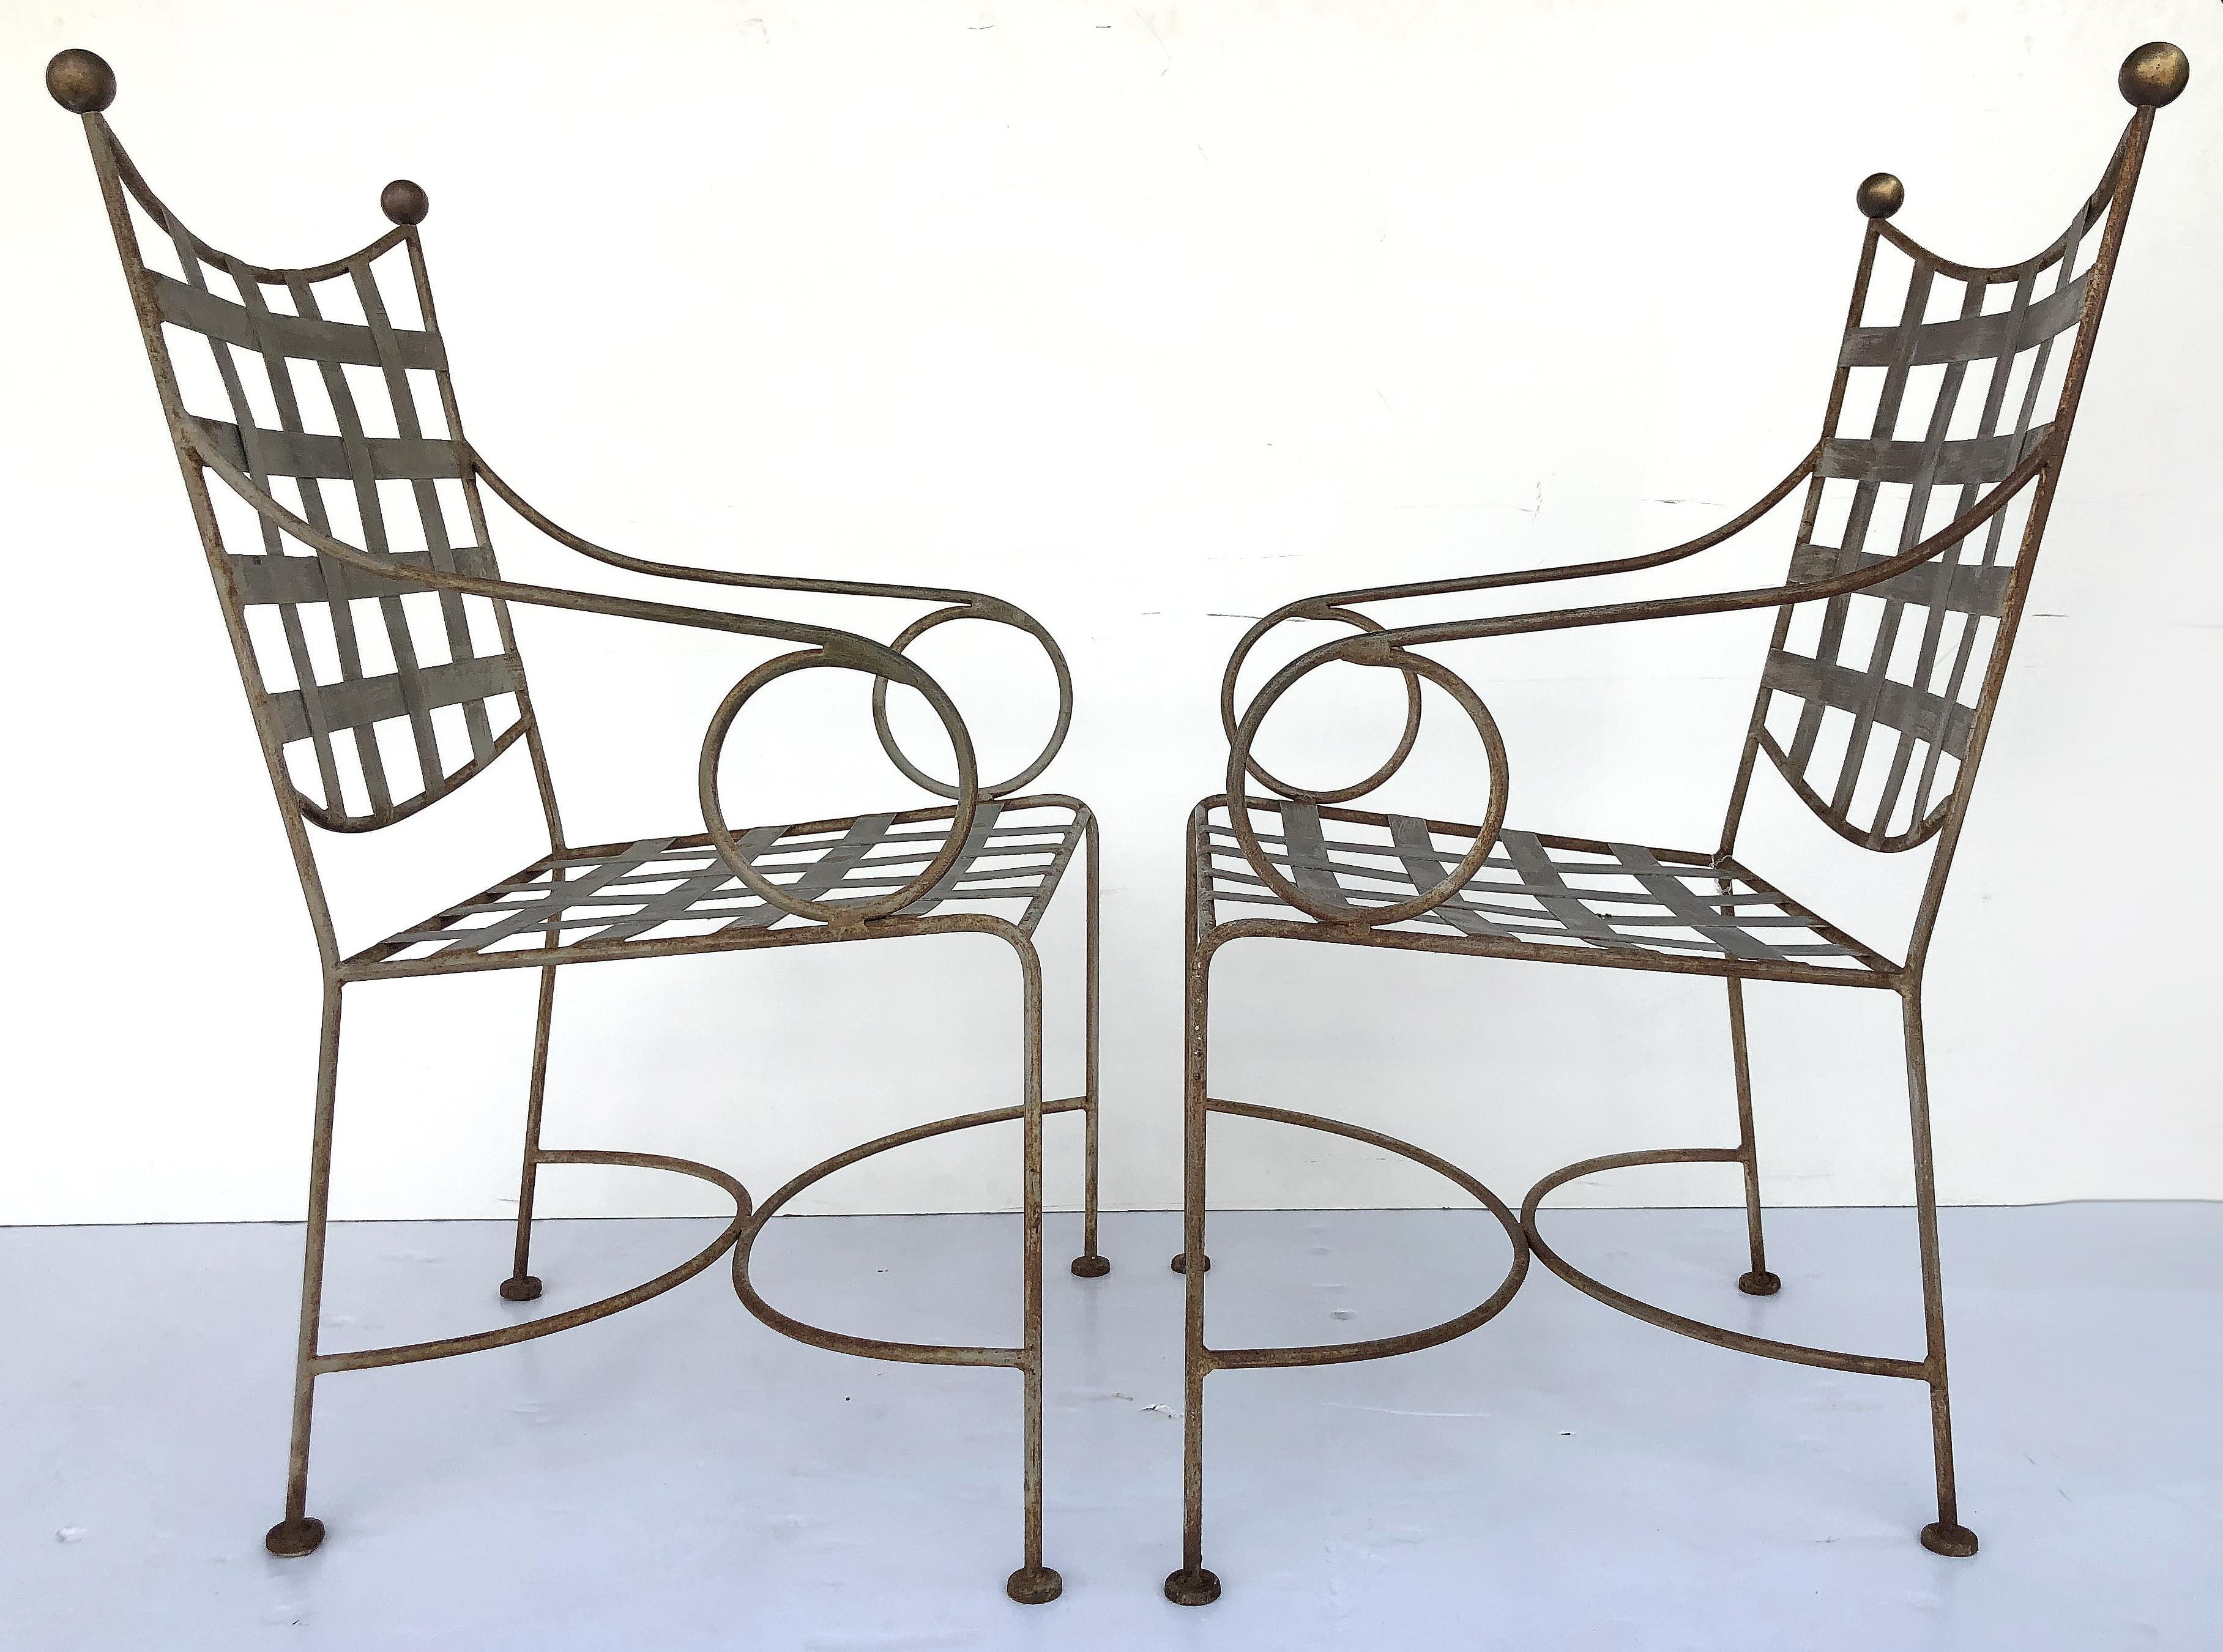 Midcentury Salterini wrought iron garden chairs, pair

Offered for sale is a vintage pair of Mid-Century Modern wrought iron garden chairs attributed to Salterini. The chairs have a sinuous classical design with a lovely rustic patina and brass